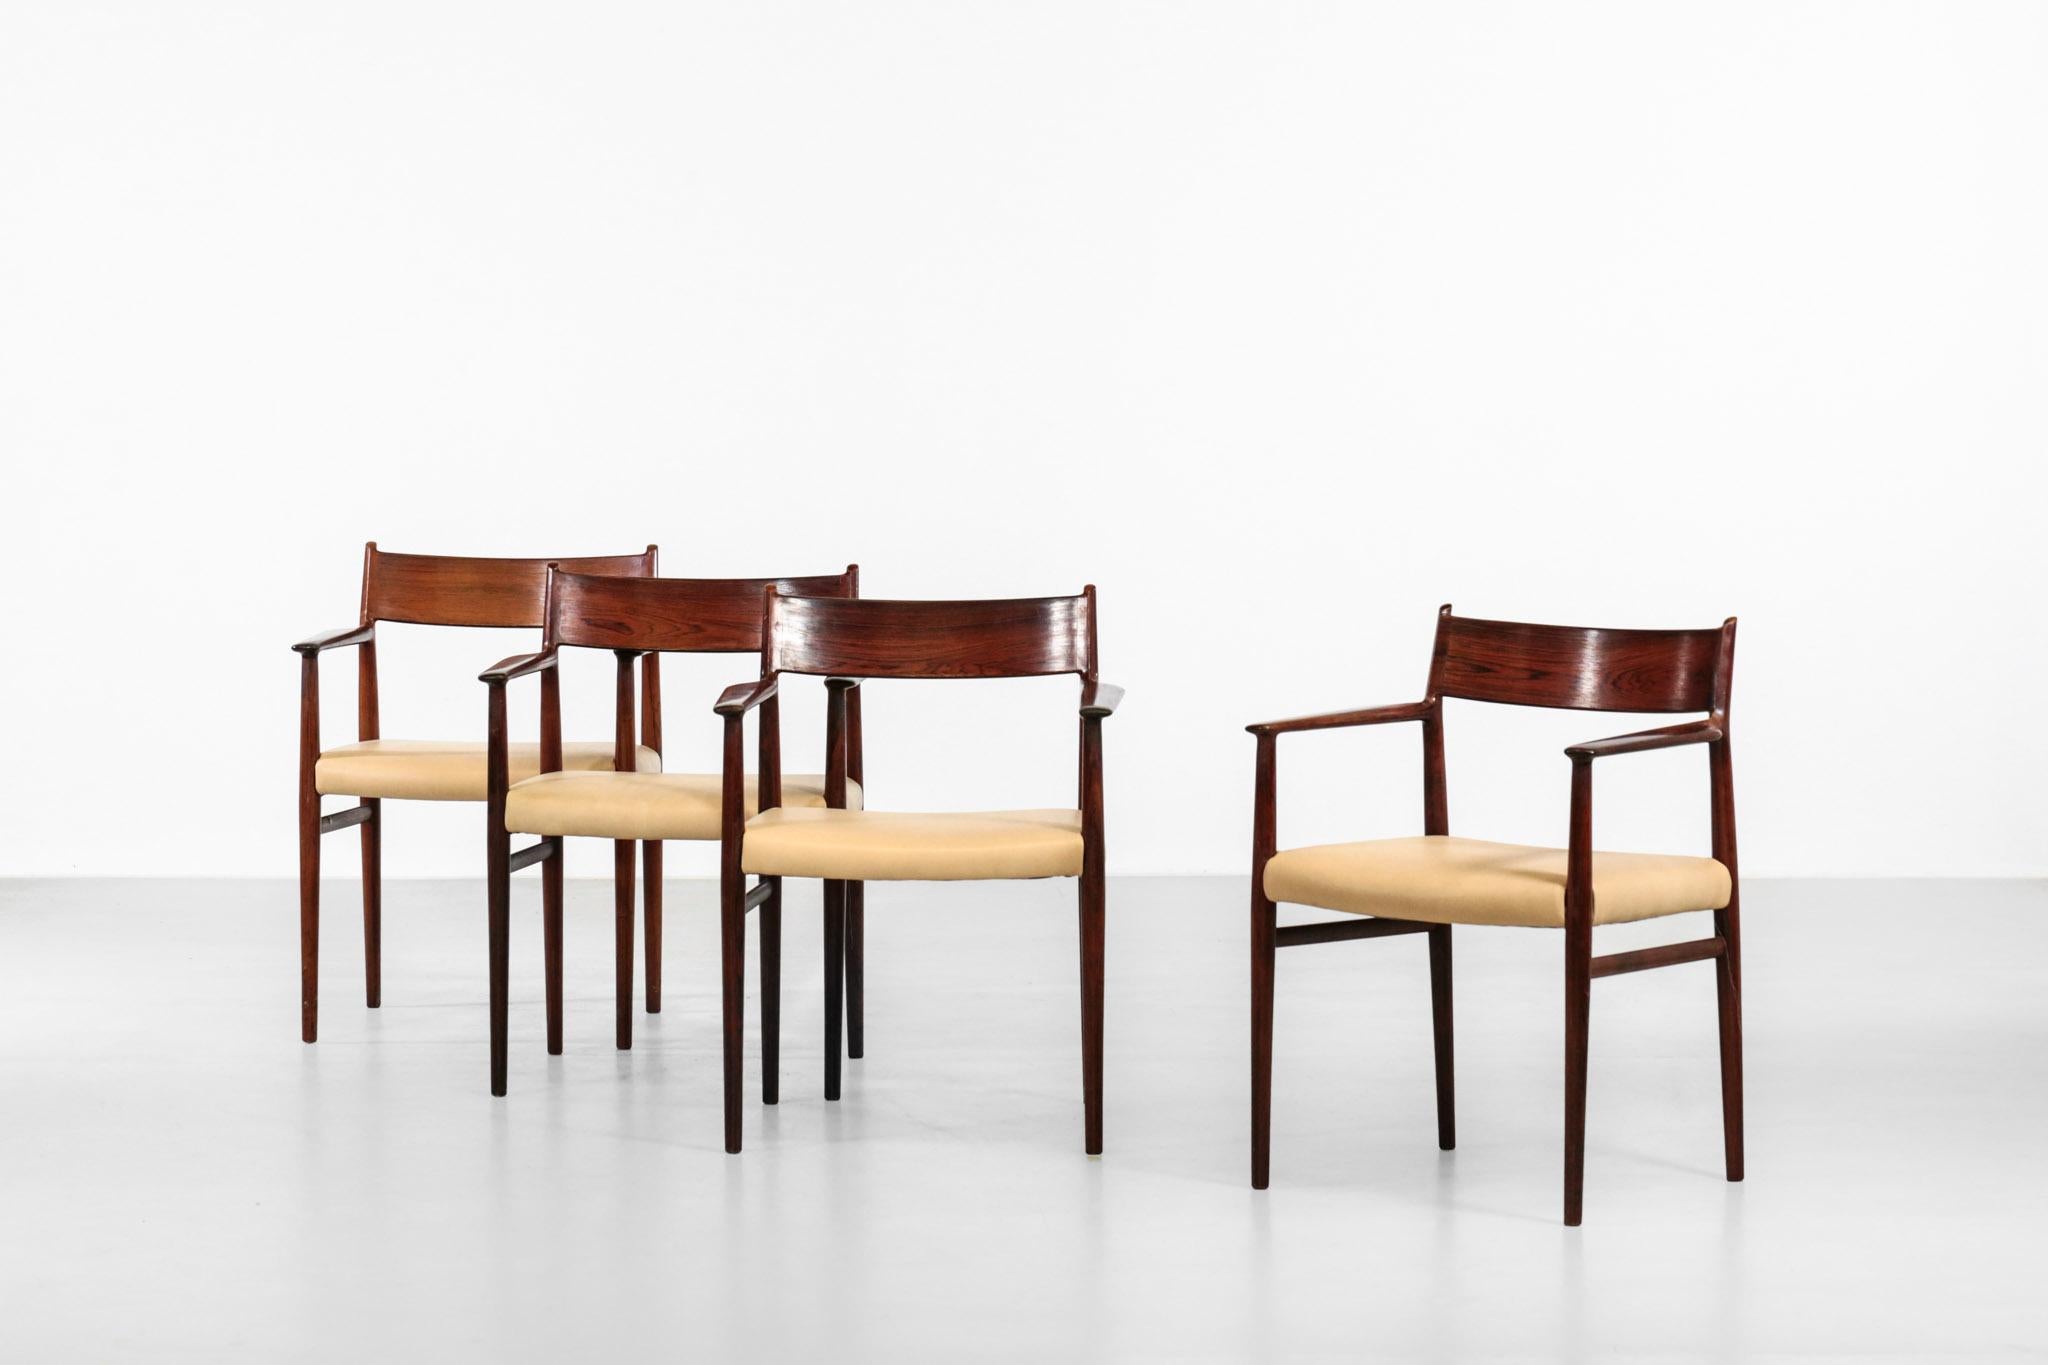 Nice set of 3 chairs with armrest designed by Arne Vodder for Sibast. Composed of rosewood structure with leather seat.